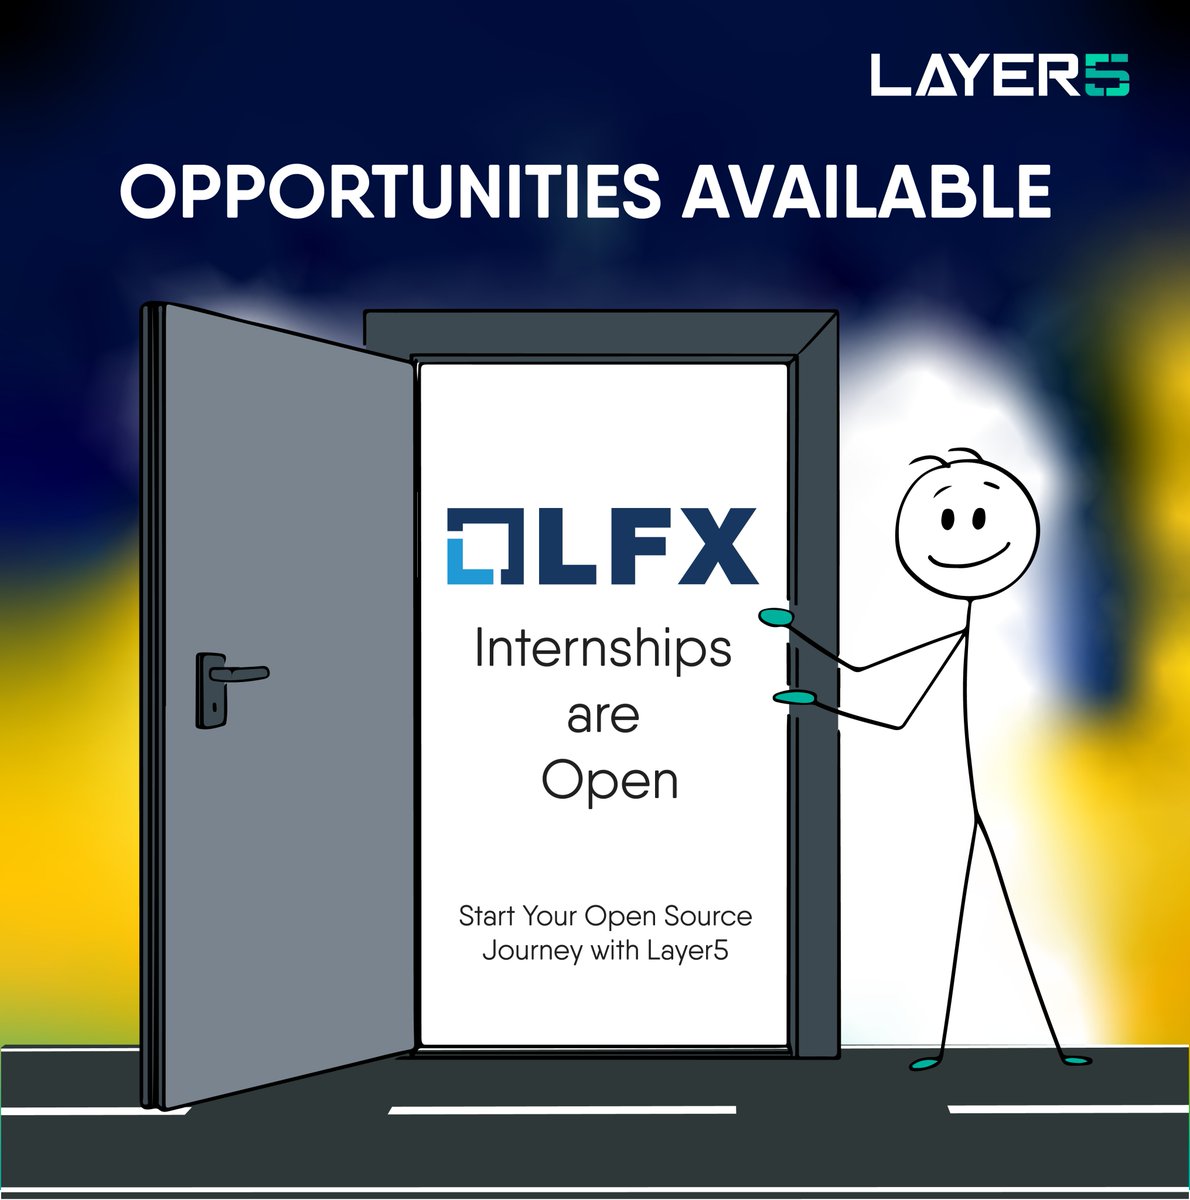 Exciting news! 🚀 Layer5 has amazing LFX opportunities available! Whether you're passionate about Frontend, Backend, or DevOps, there's something for you! Check out the opportunities now! - layer5.io/programs/lfx #opensource #cncf